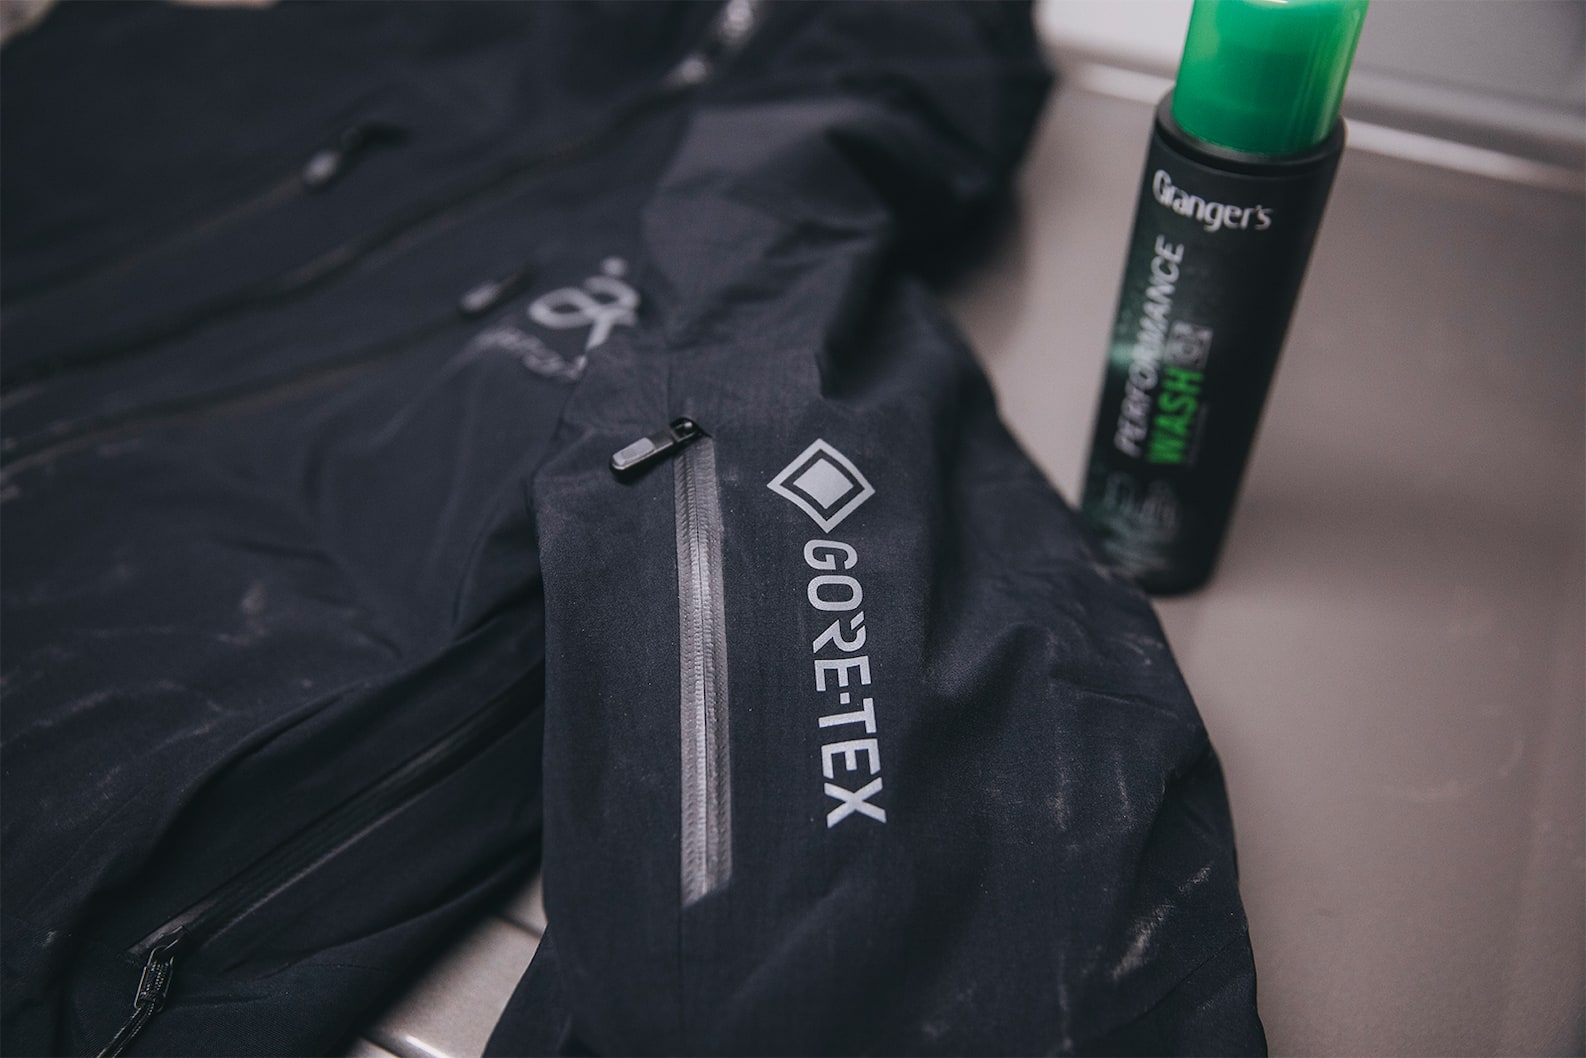 How to Wash GORE-TEX® Outerwear